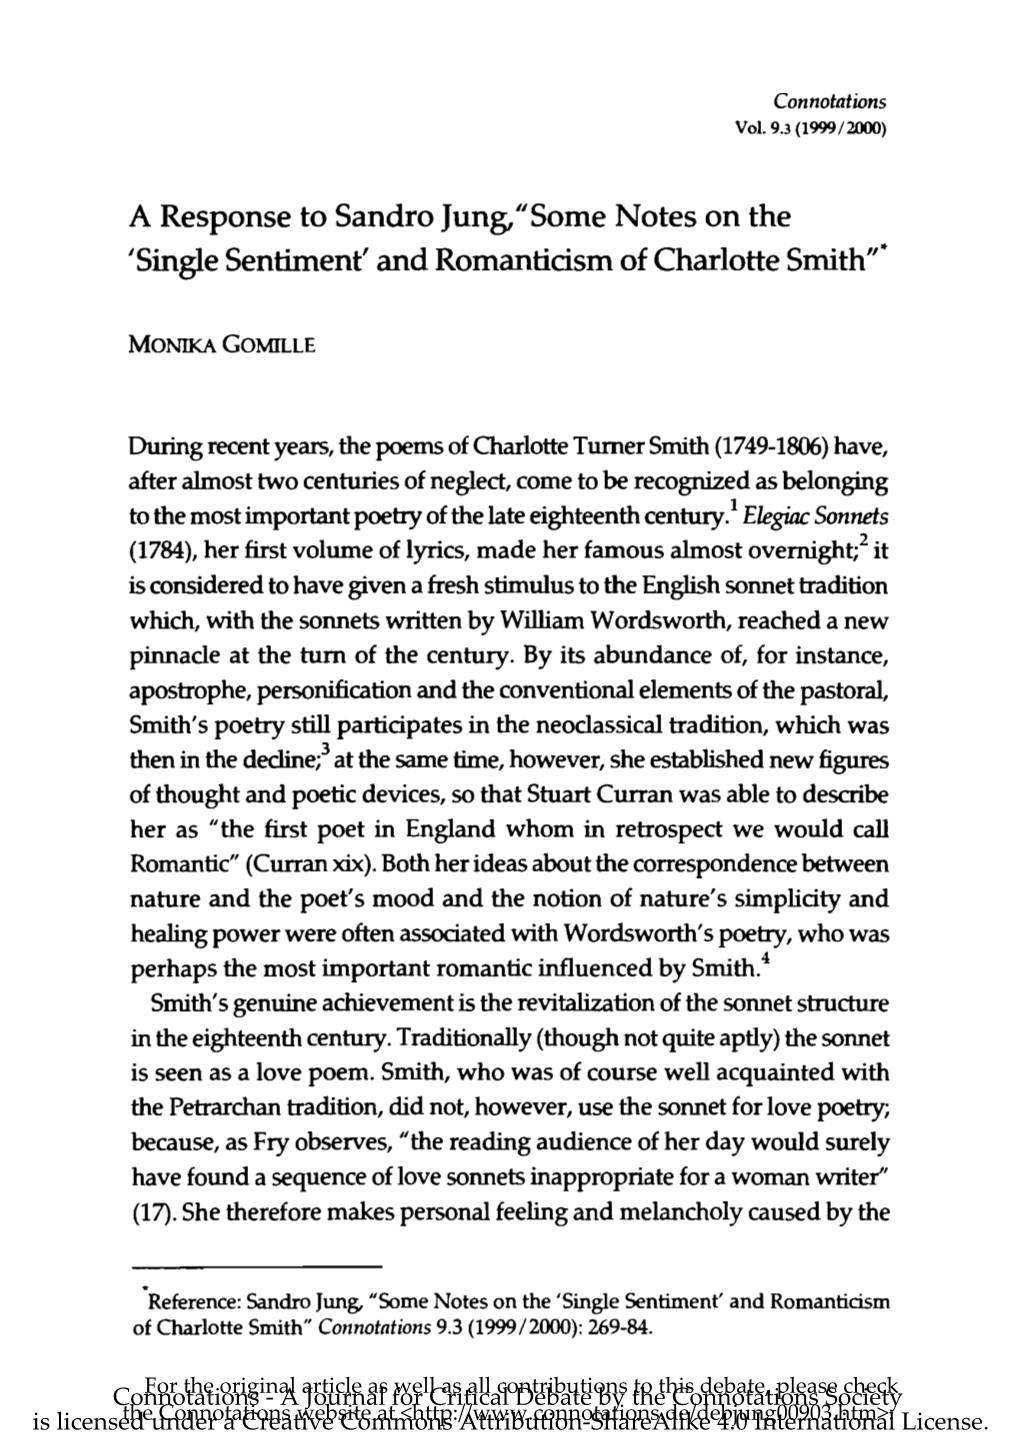 Some Notes on the 'Single Sentiment' and Romanticism of Charlotte Smith"